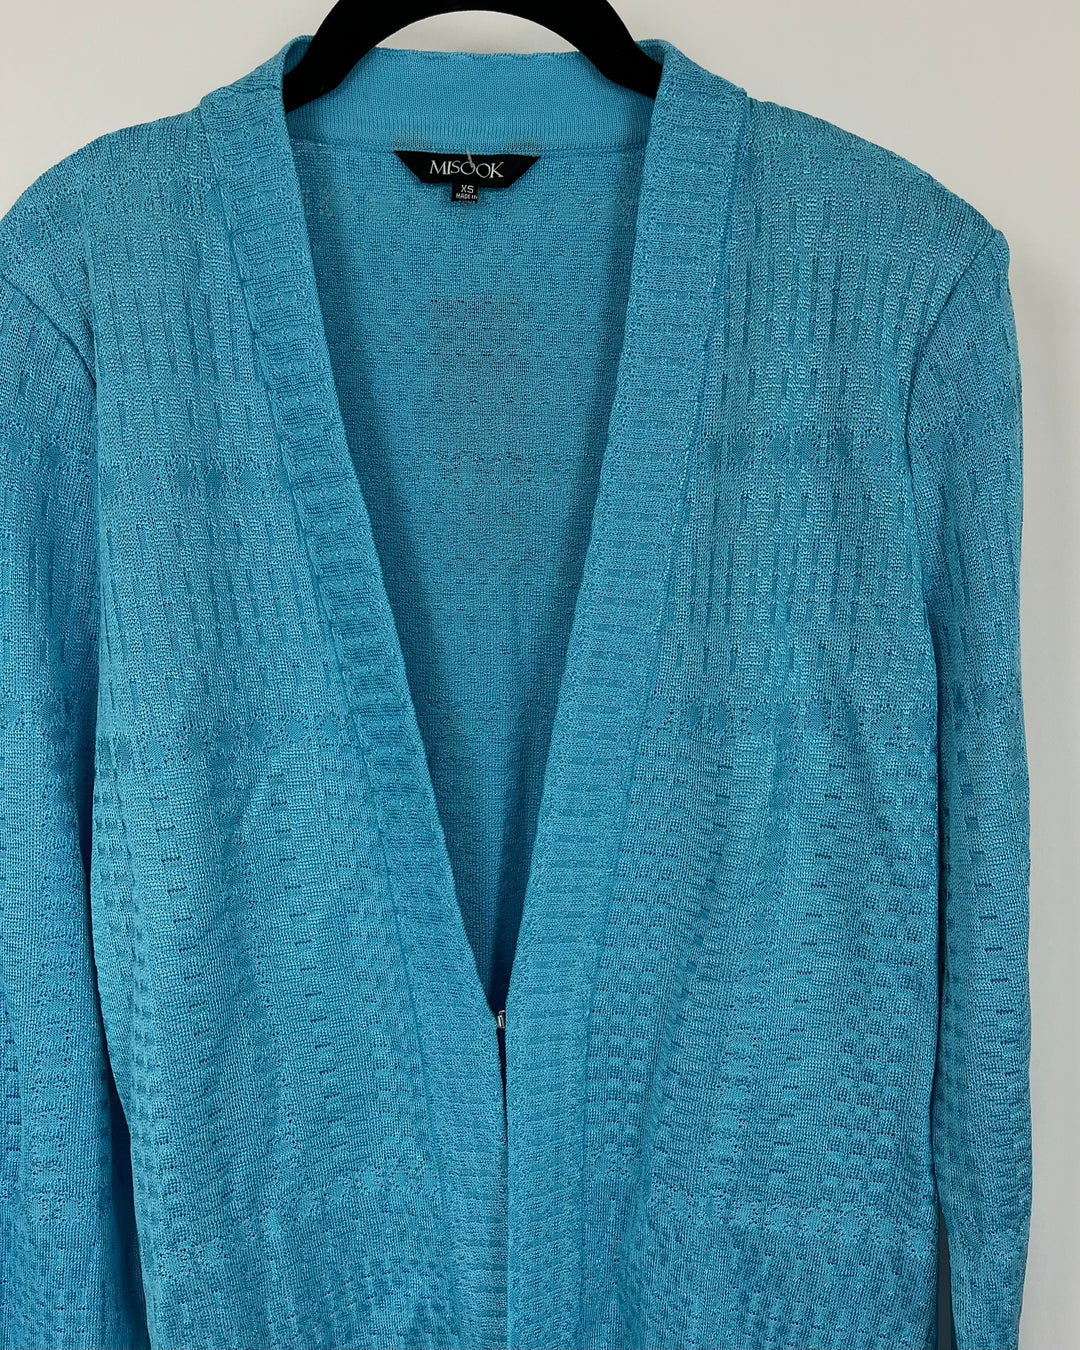 Baby Blue Textured Cardigan - Size 2-4